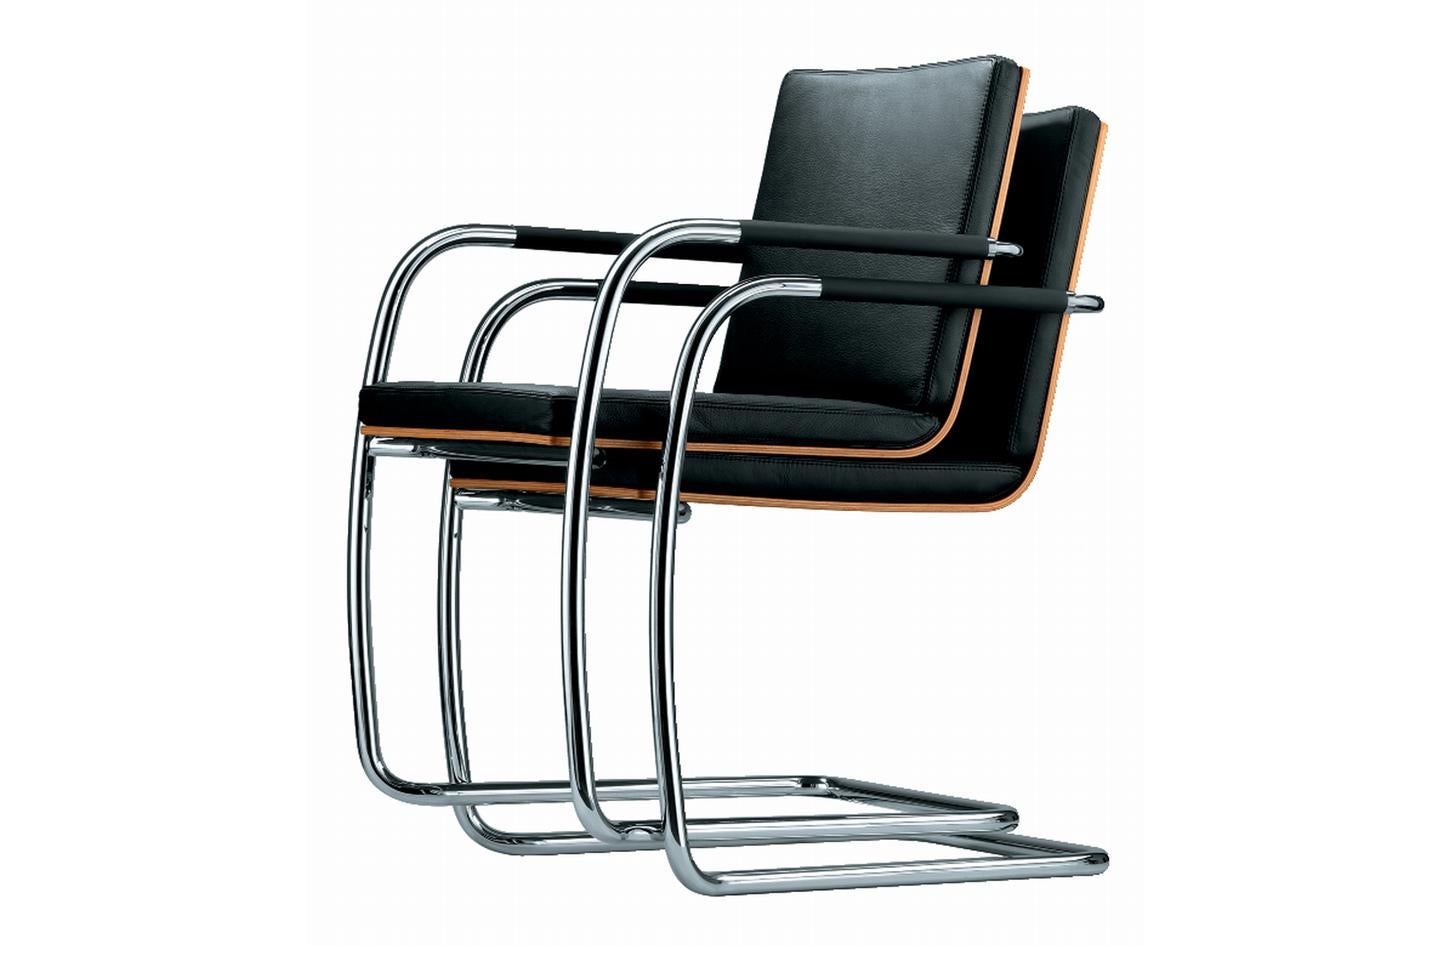 RANGE S 60
Reserved elegance combined with high seating comfort. With the S 60 Glen Oliver Löw succeeded in reinterpreting the cantilever chair and developing a contemporary solution. The seat shell made of moulded wood is connected with the